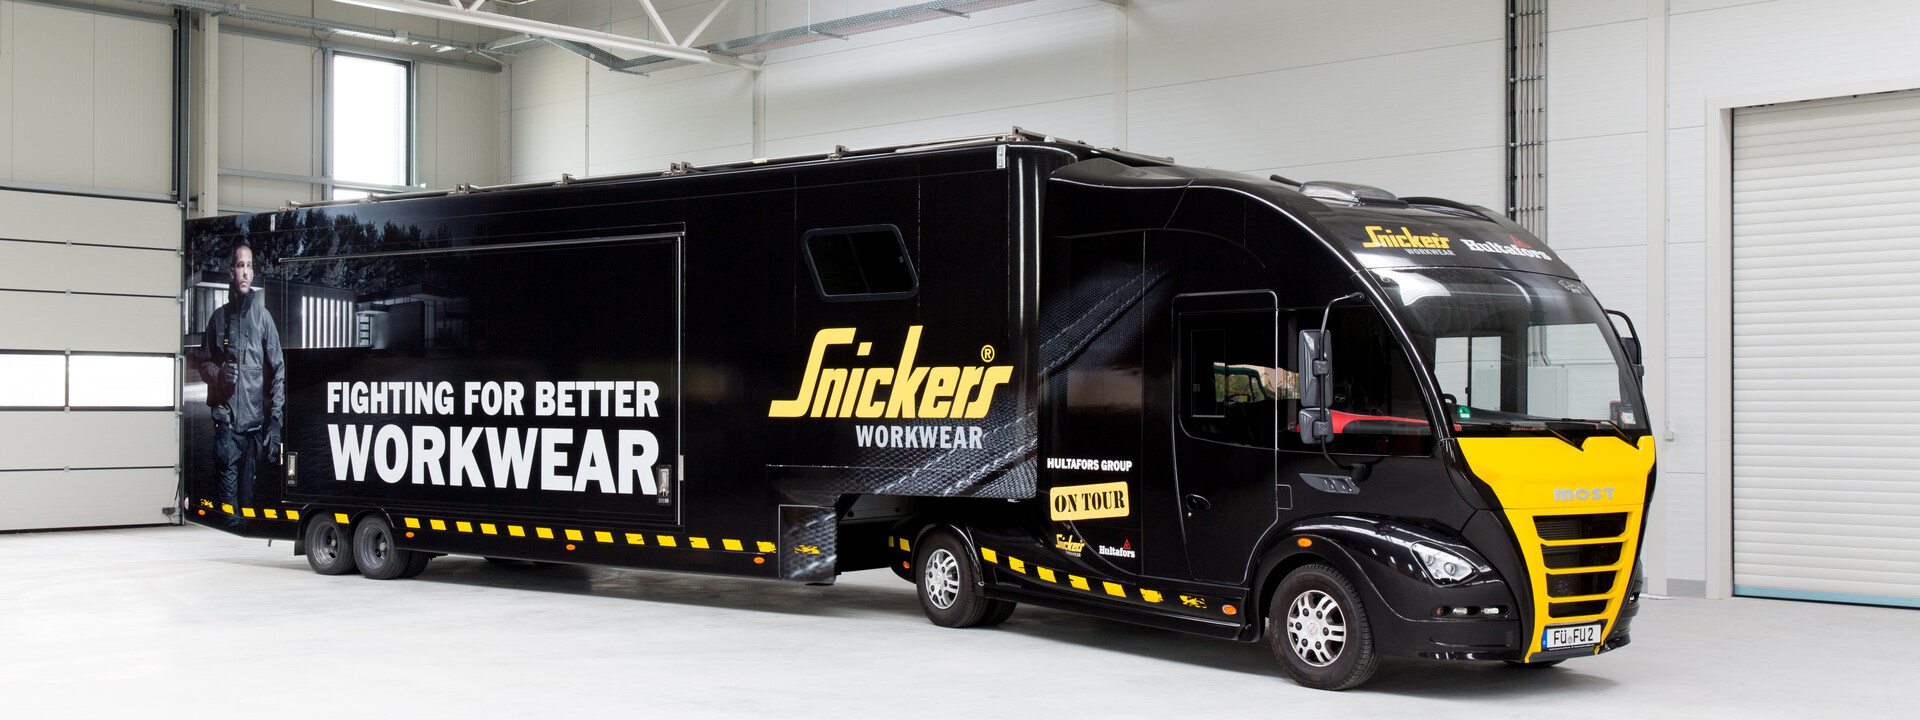 Snickers Showtruck